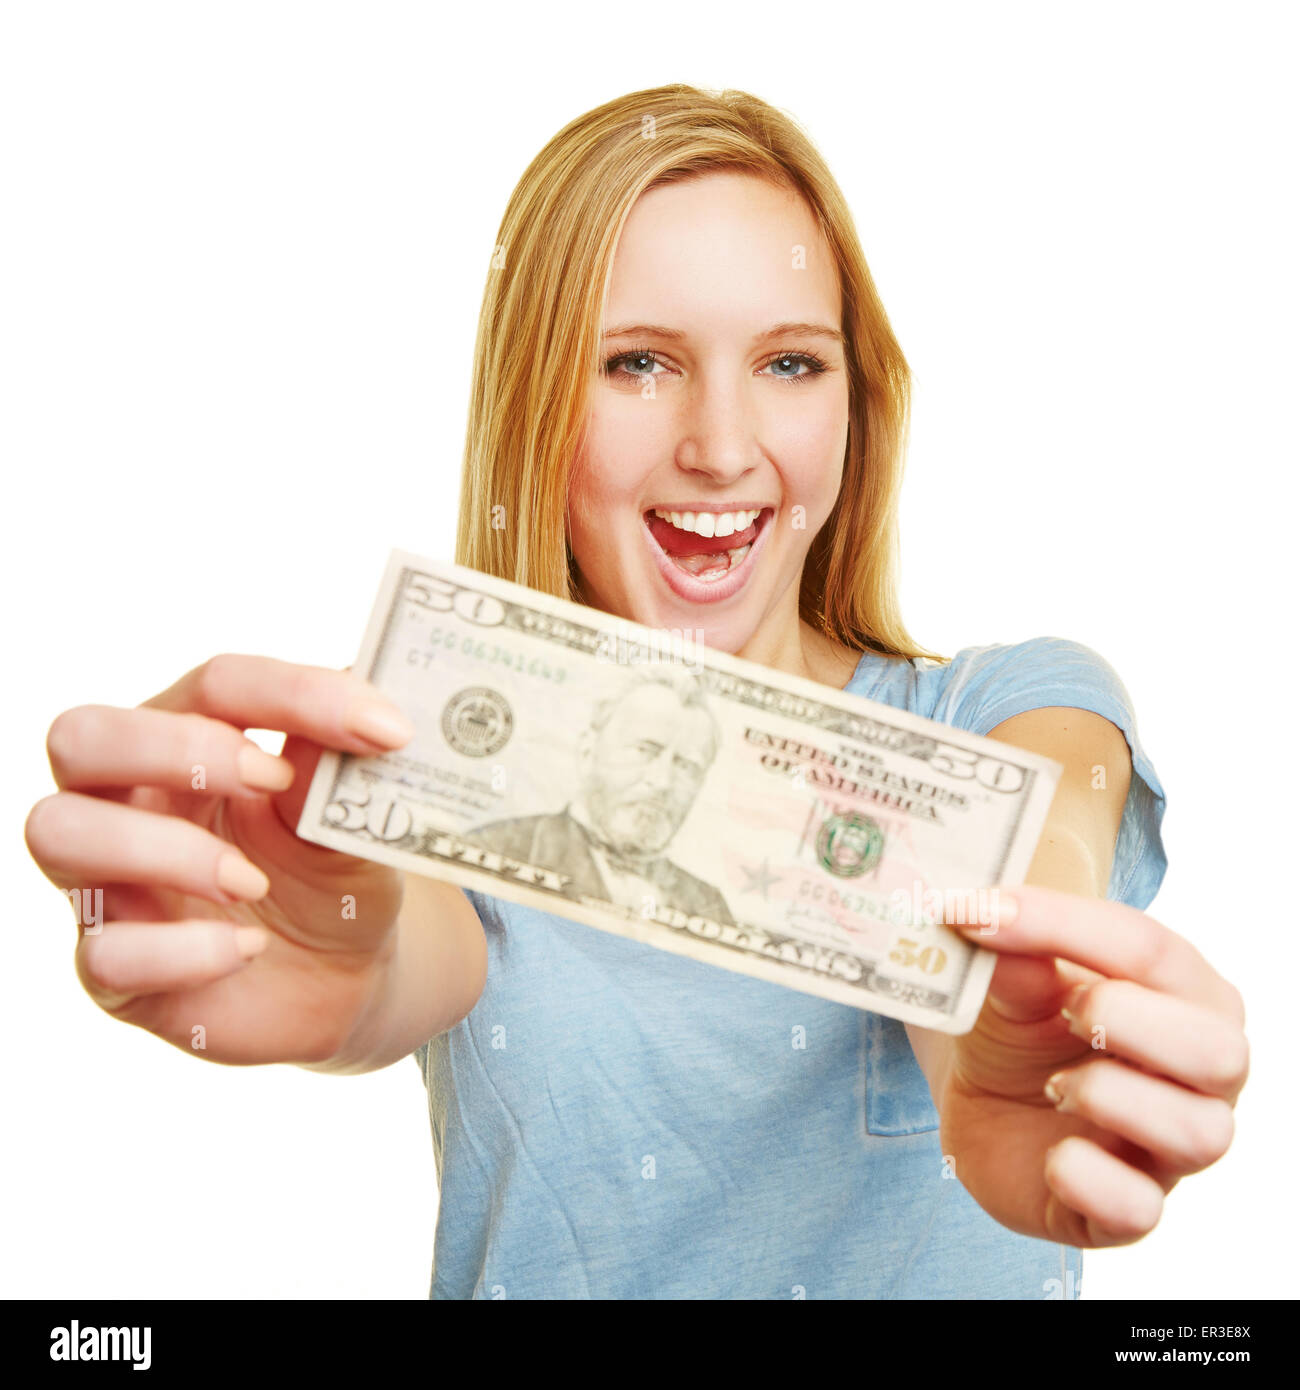 Happy young woman showing 50 dollar bill in her hands Stock Photo